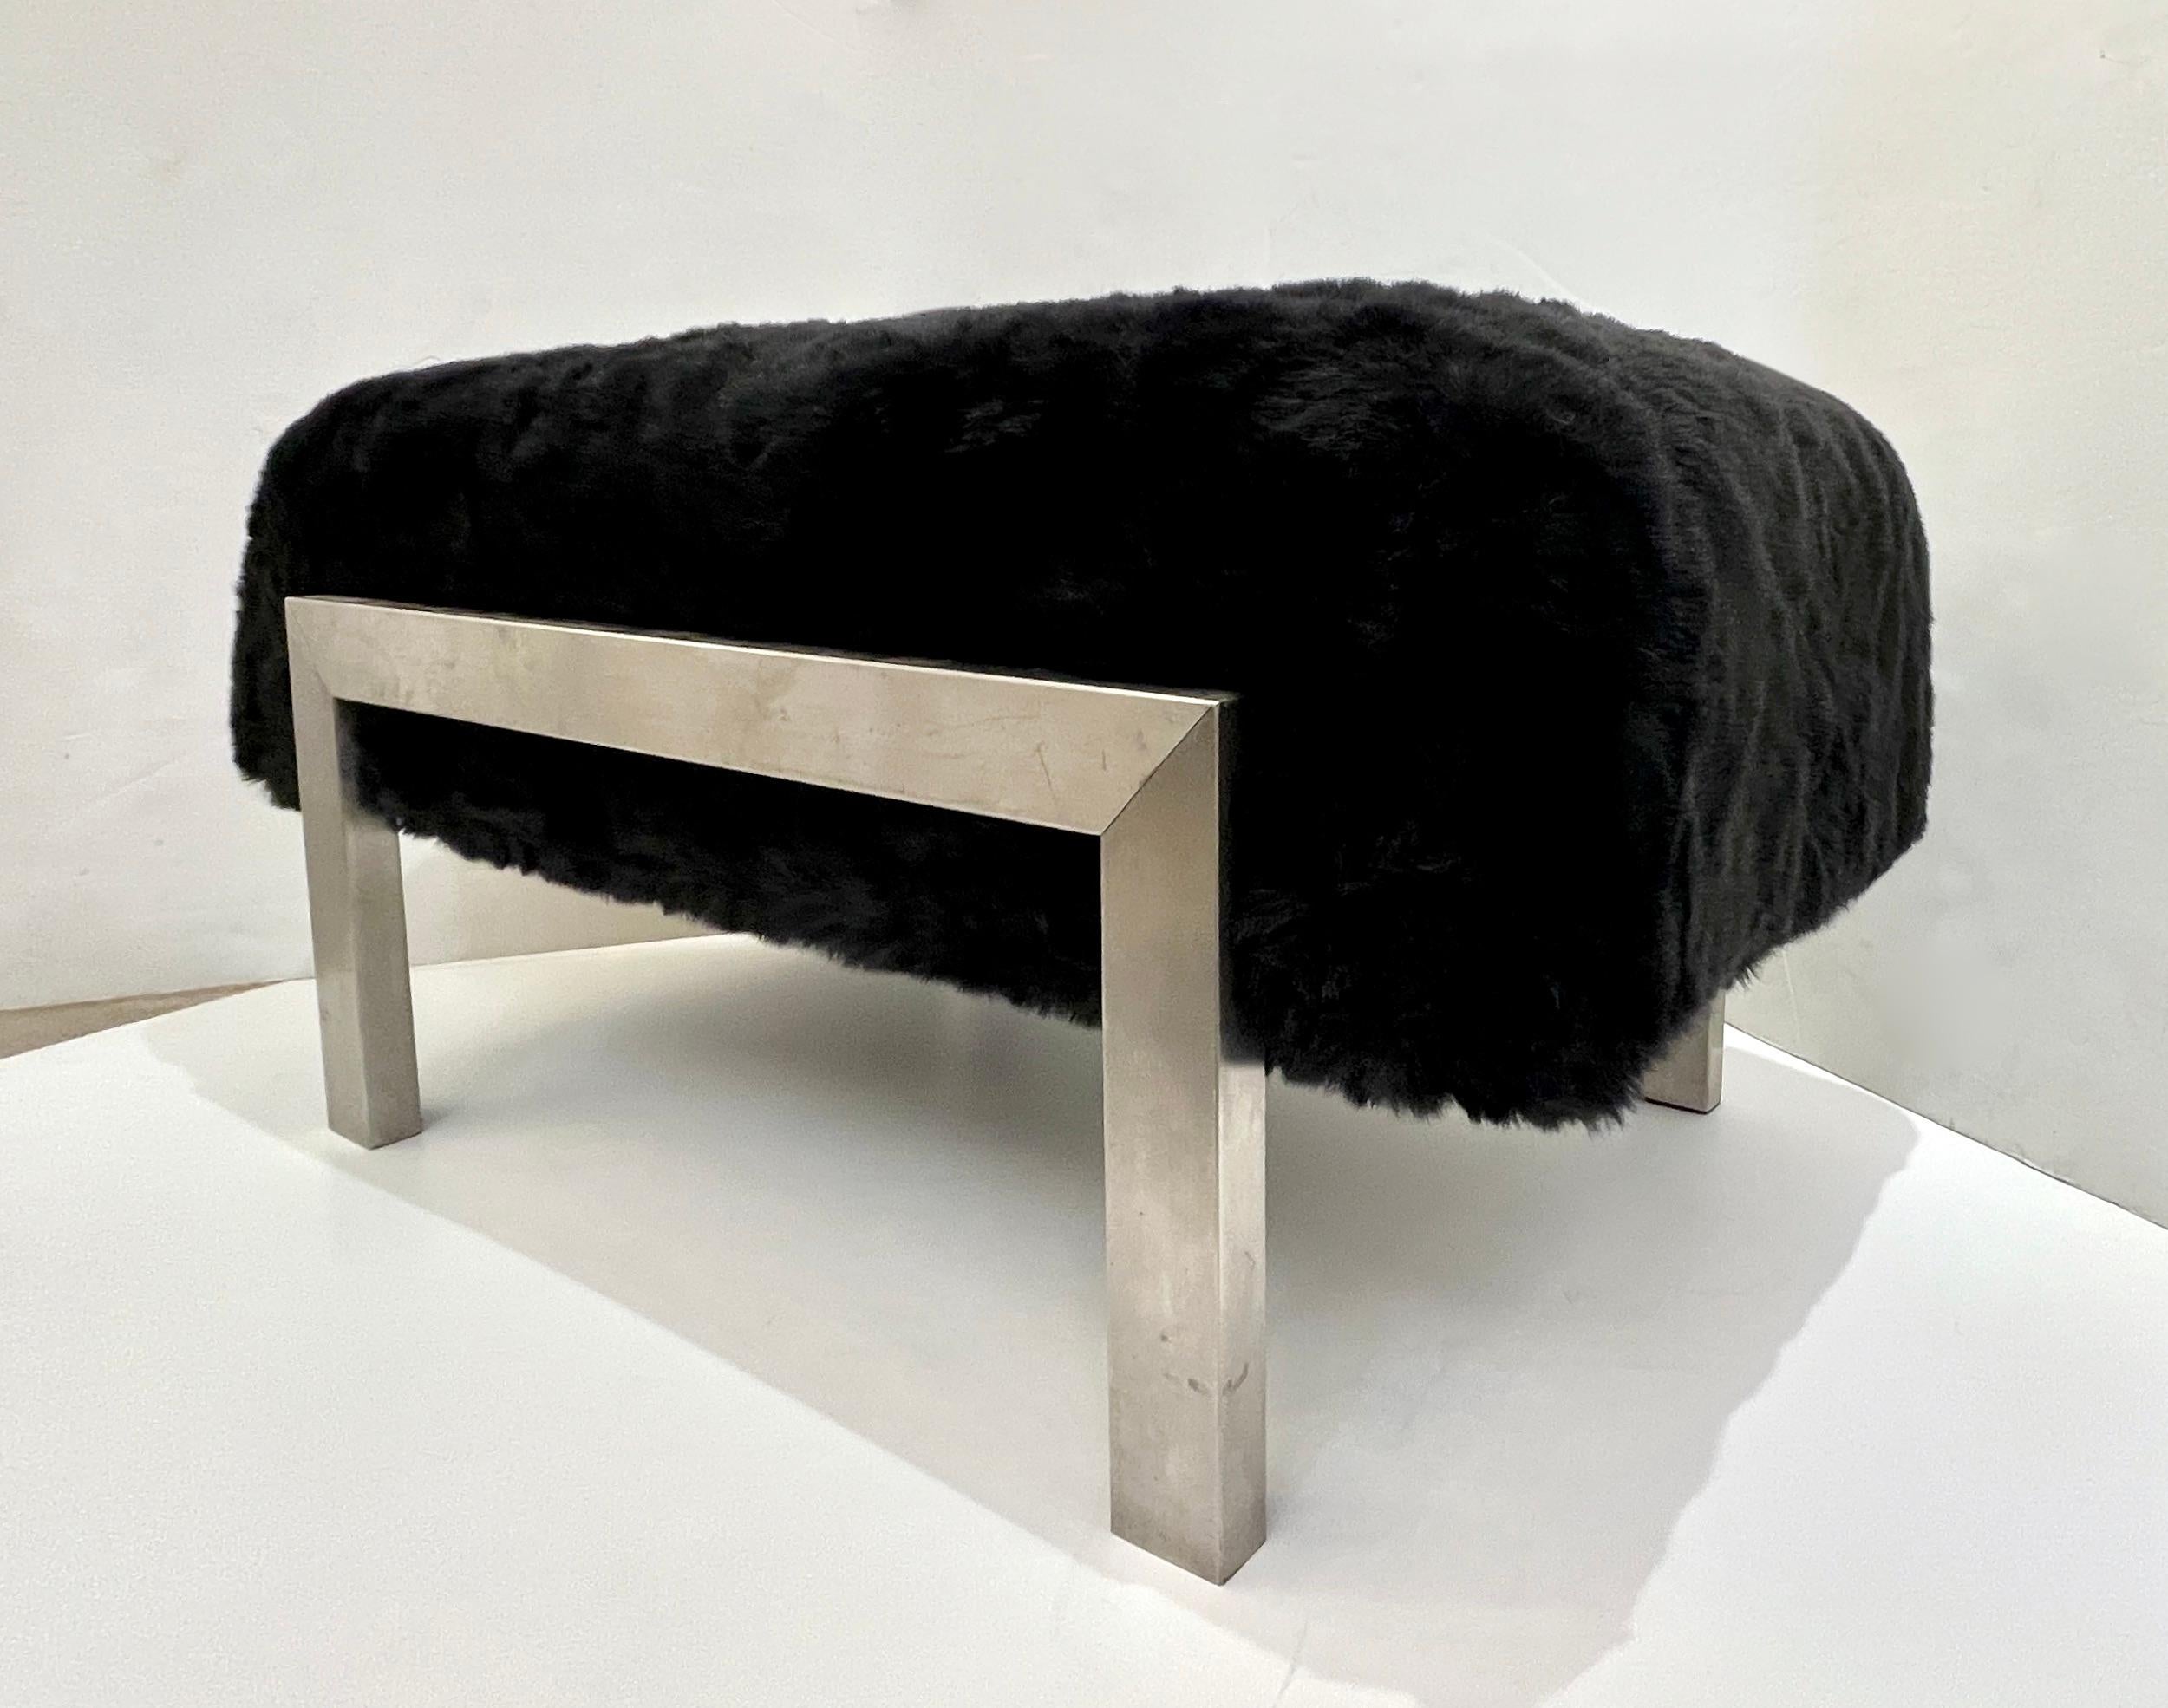 Mid-Century Modern 1970s Italian Vintage Black Faux Fur Steel Bed Stool Bench - 1 Pair available For Sale